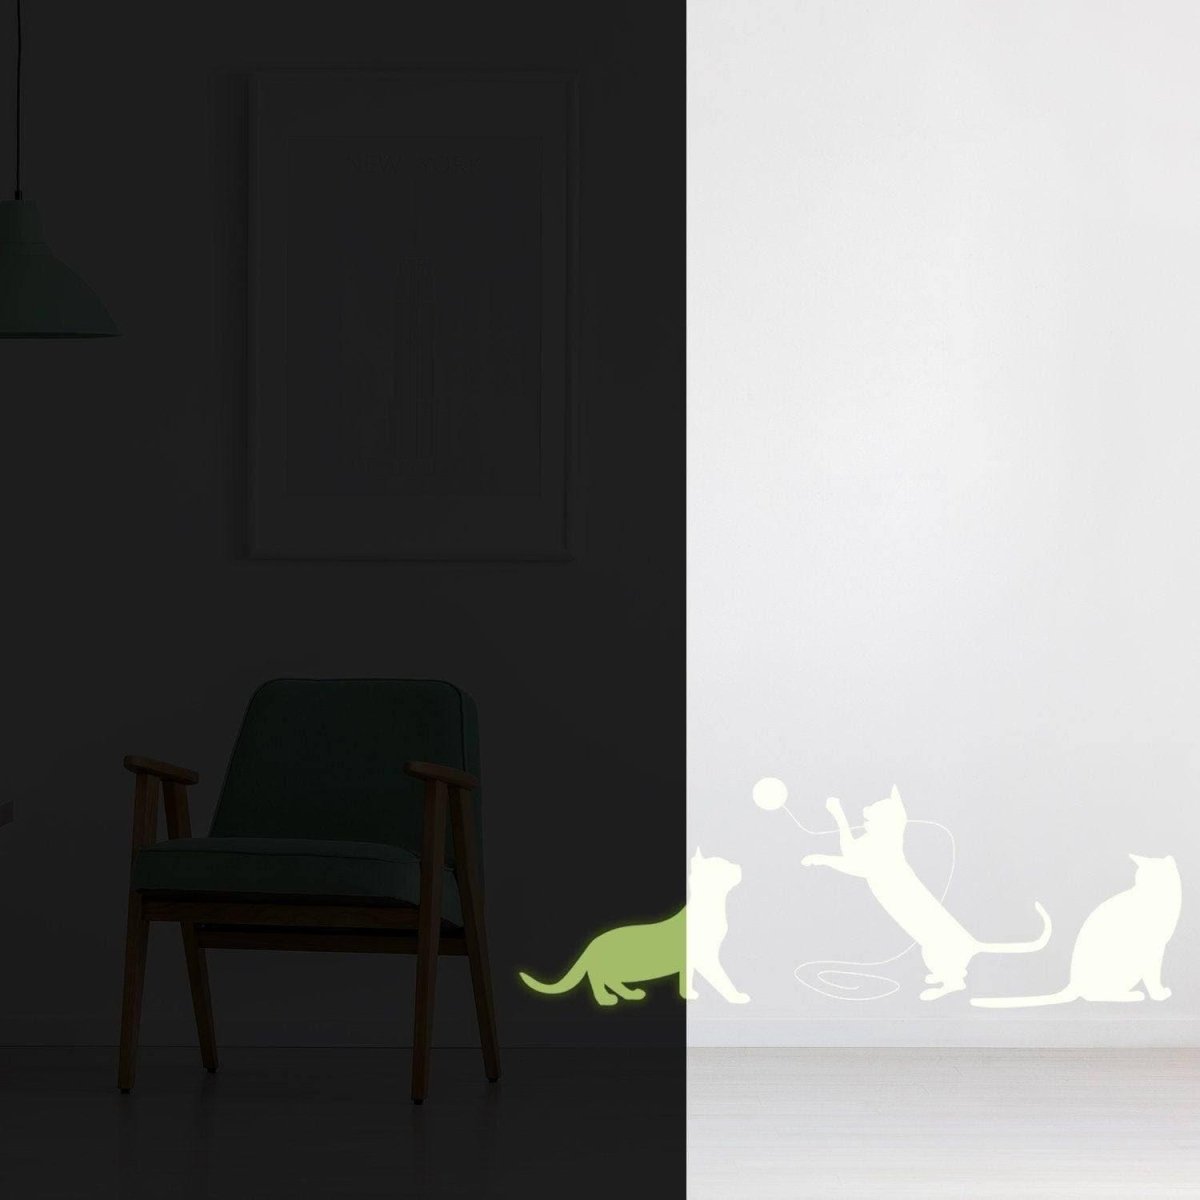 Luminescent Feline Wall Decal - Transform Your Space with Enchanting Glow - Decords